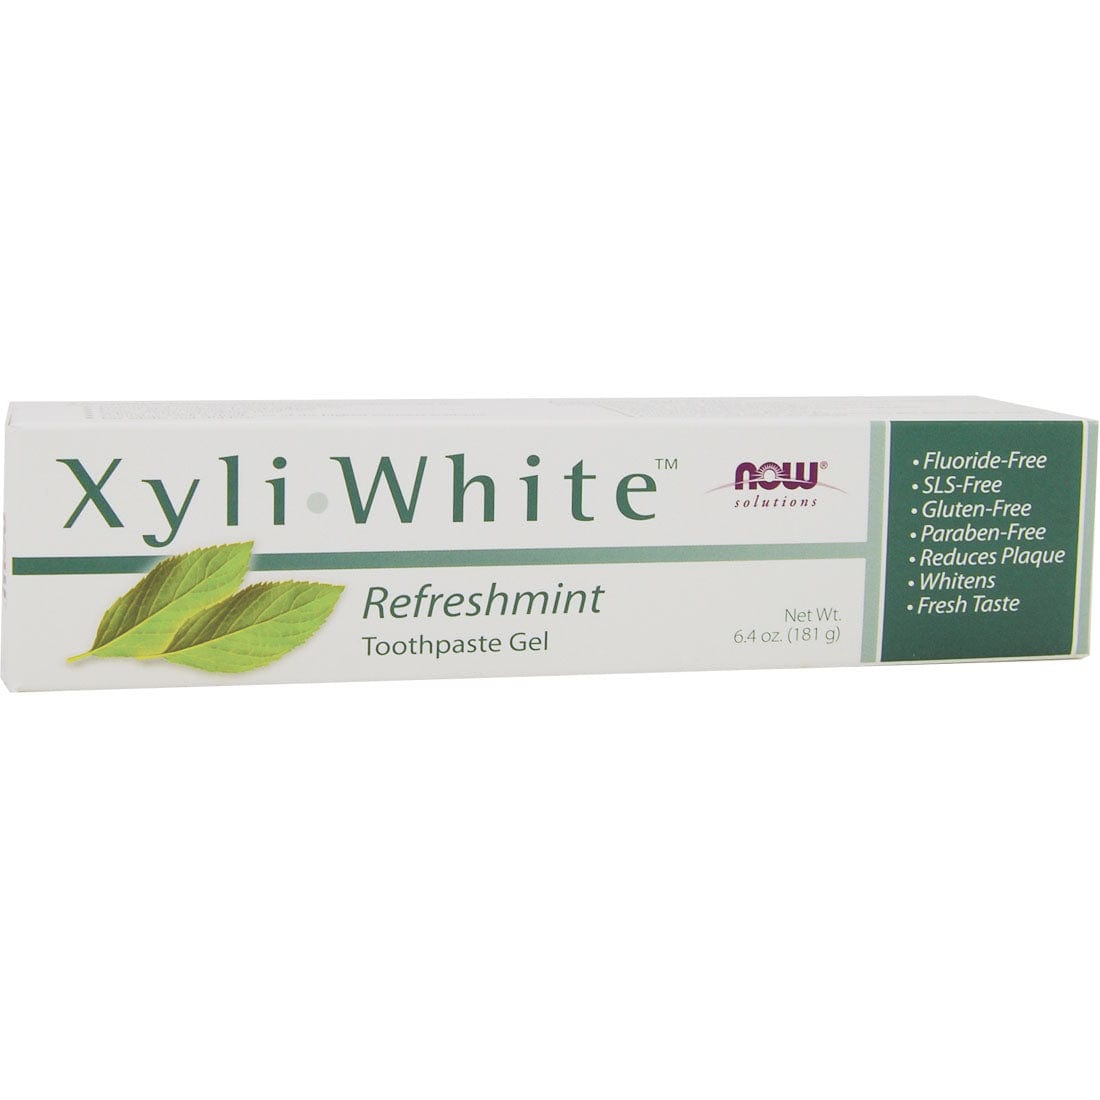 NOW XyliWhite Toothpaste Gel, 181g